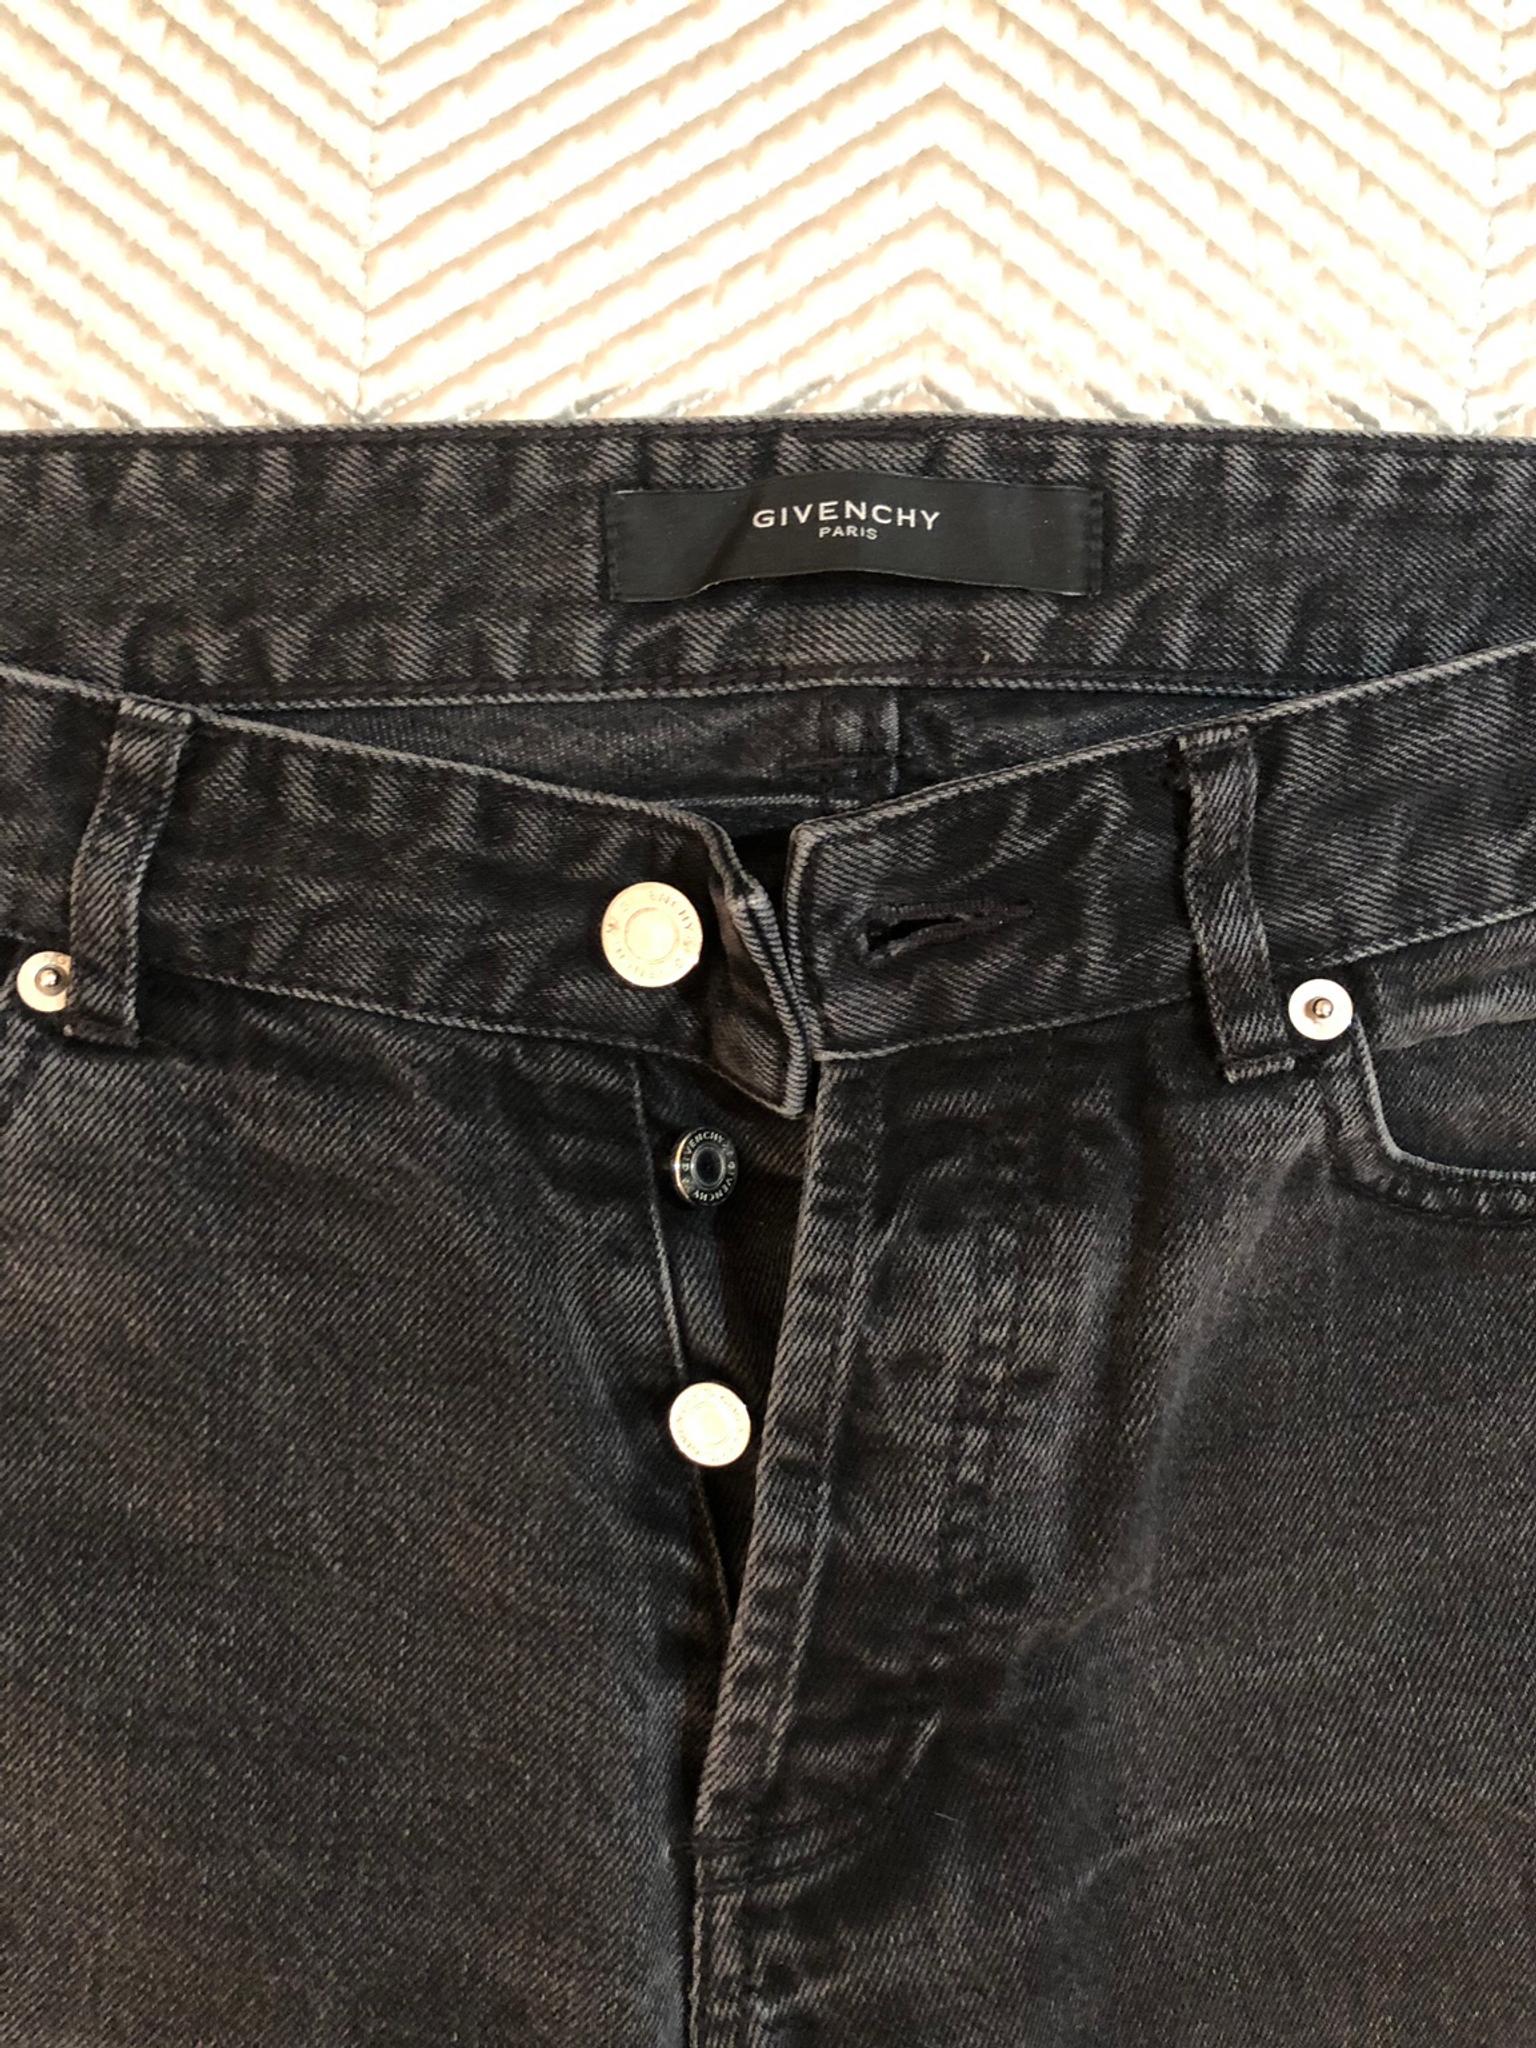 mens givenchy jeans